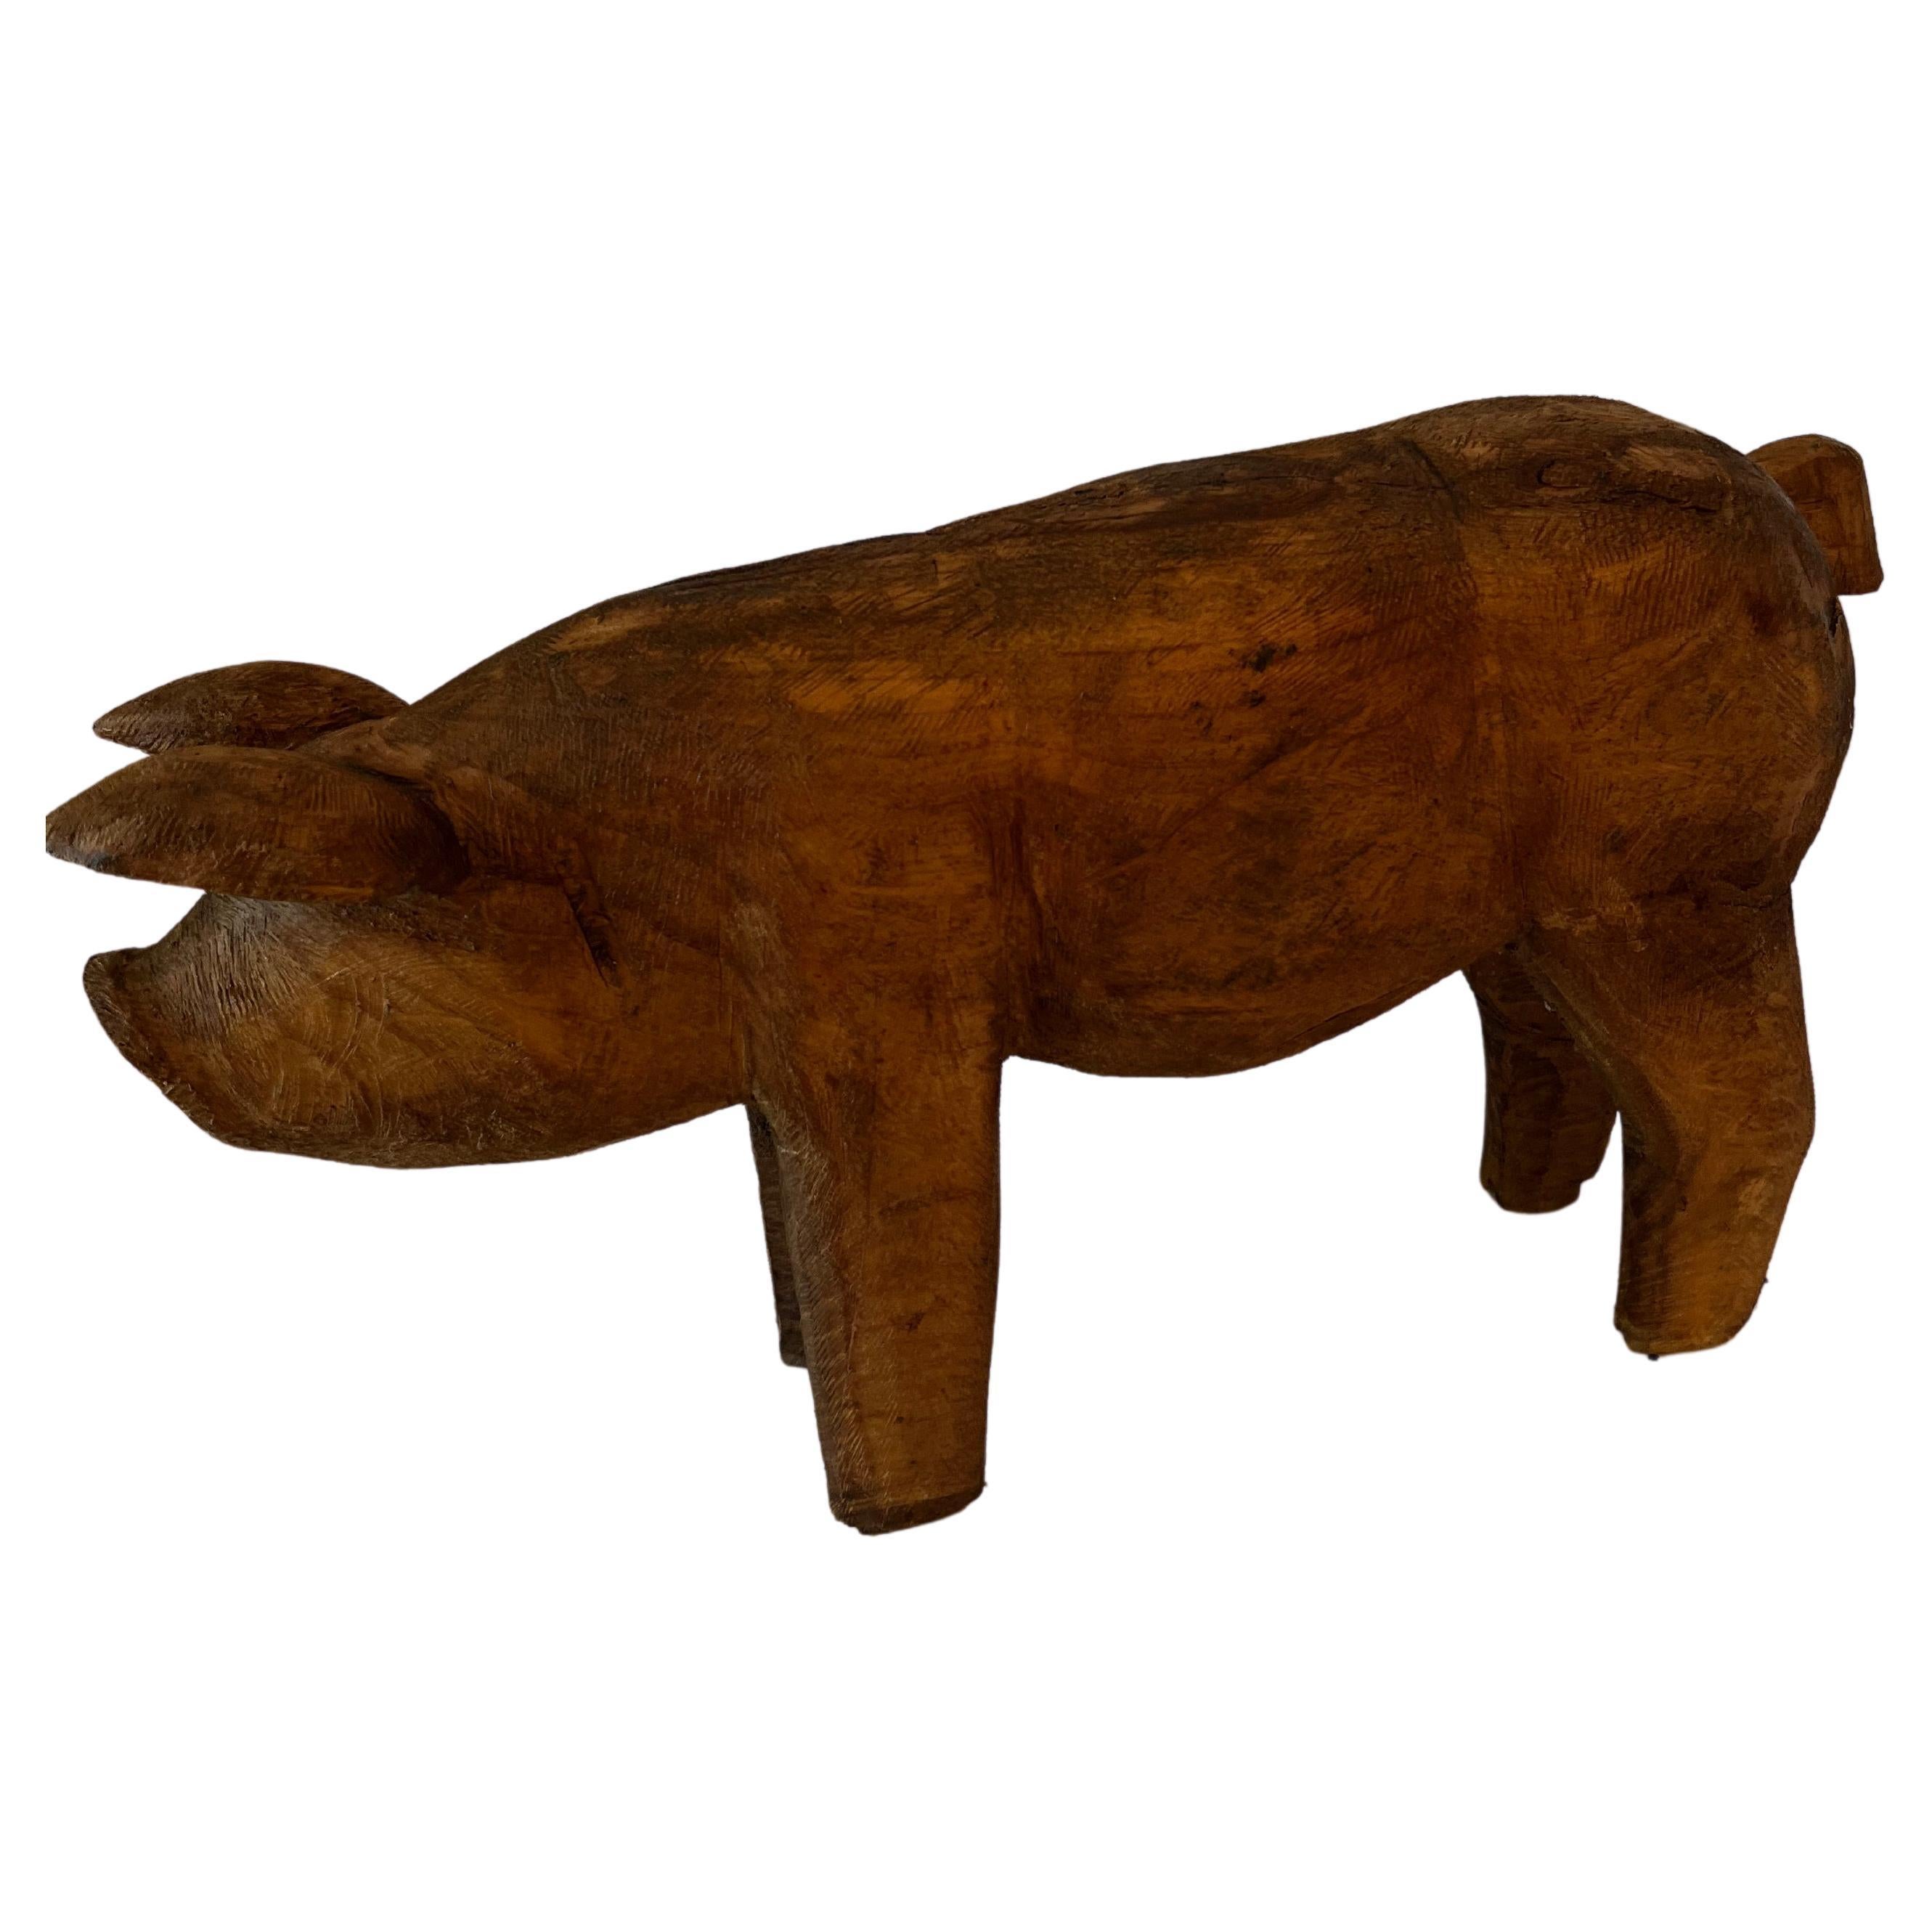 A hand Carved Wooden Pig - a compliment to many settings - great in the kitchen, on a shelf, console table, or even staged on a table in the garden.

He / she is the perfect little piglet, likely carved to show off at a store or butcher shop?  

A